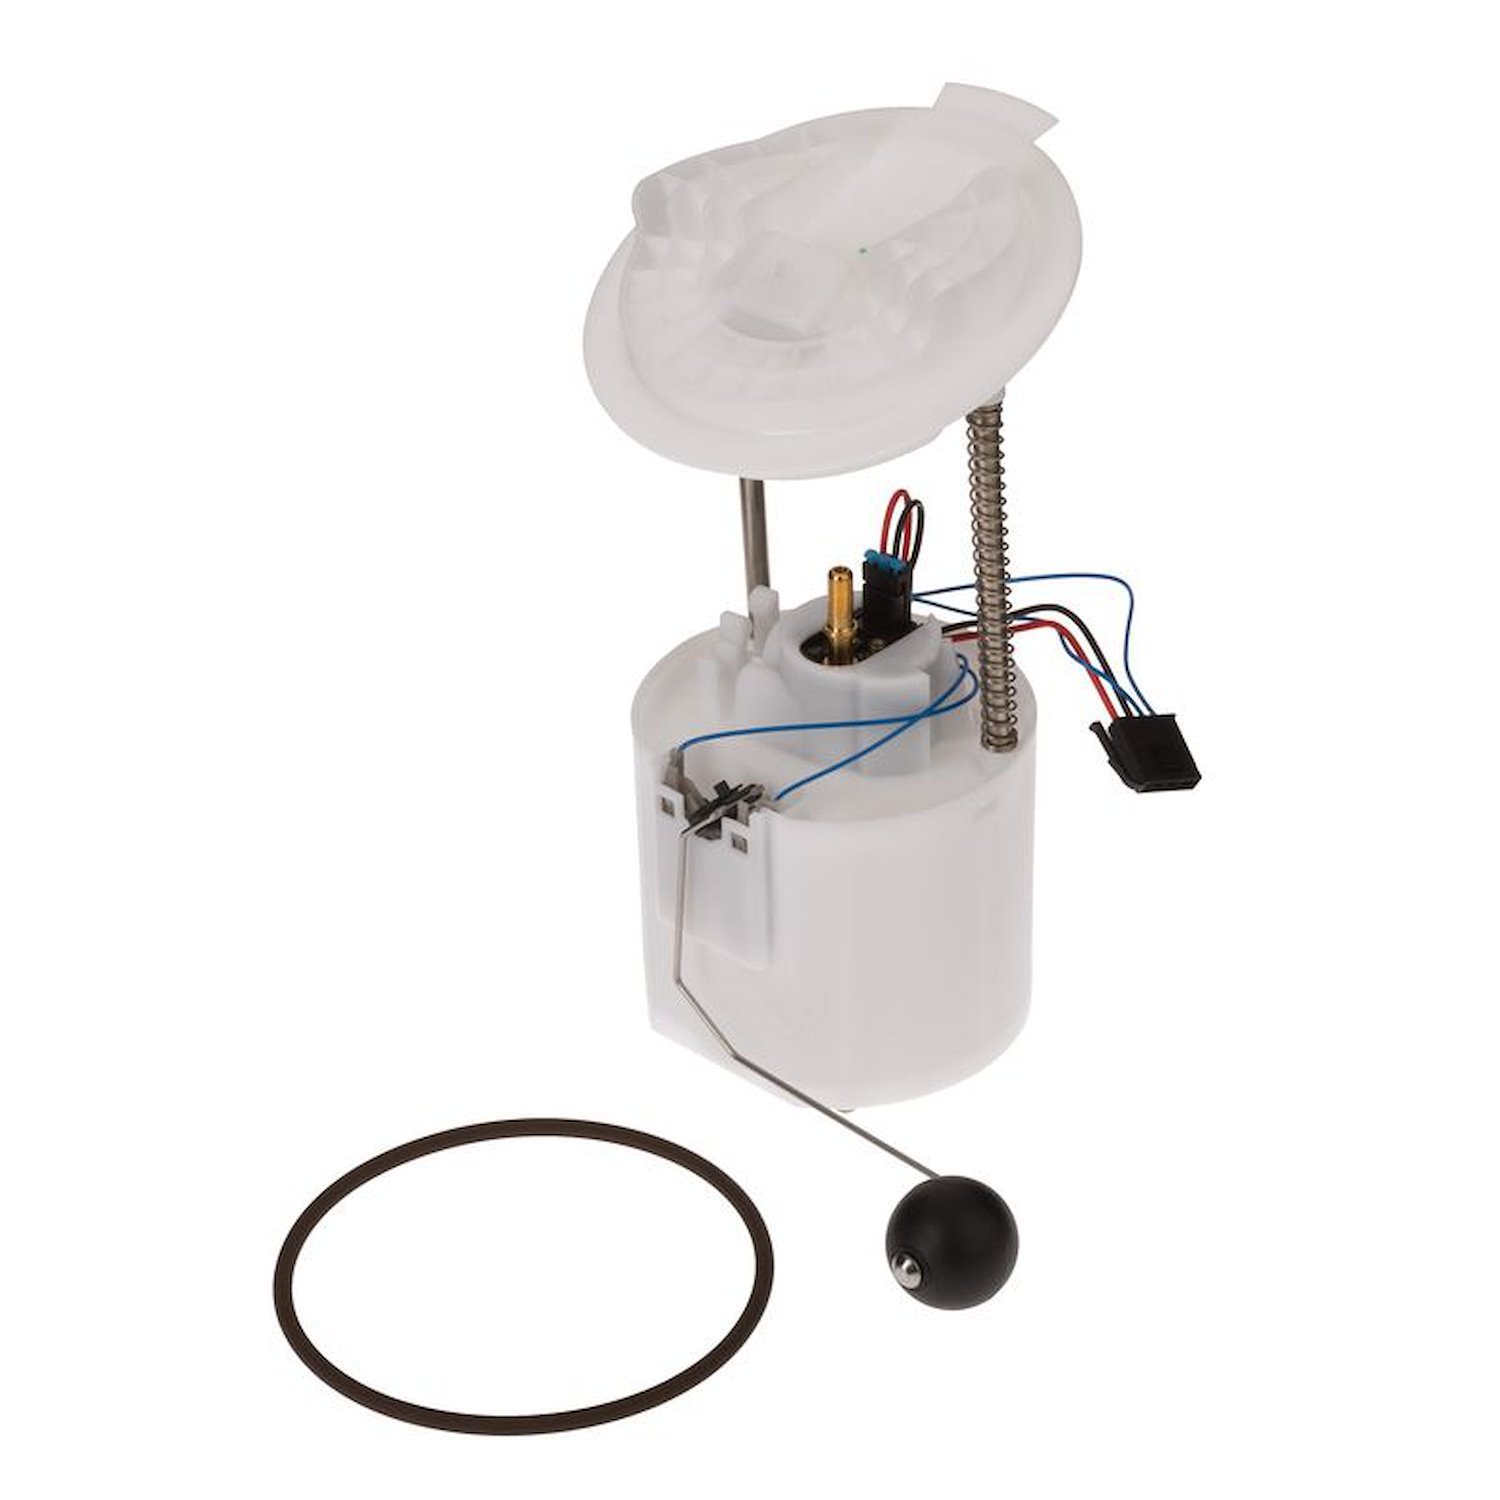 OE Chrysler/Dodge Replacement Fuel Pump Module Assembly for 2005-2017 Chrysler/Dodge